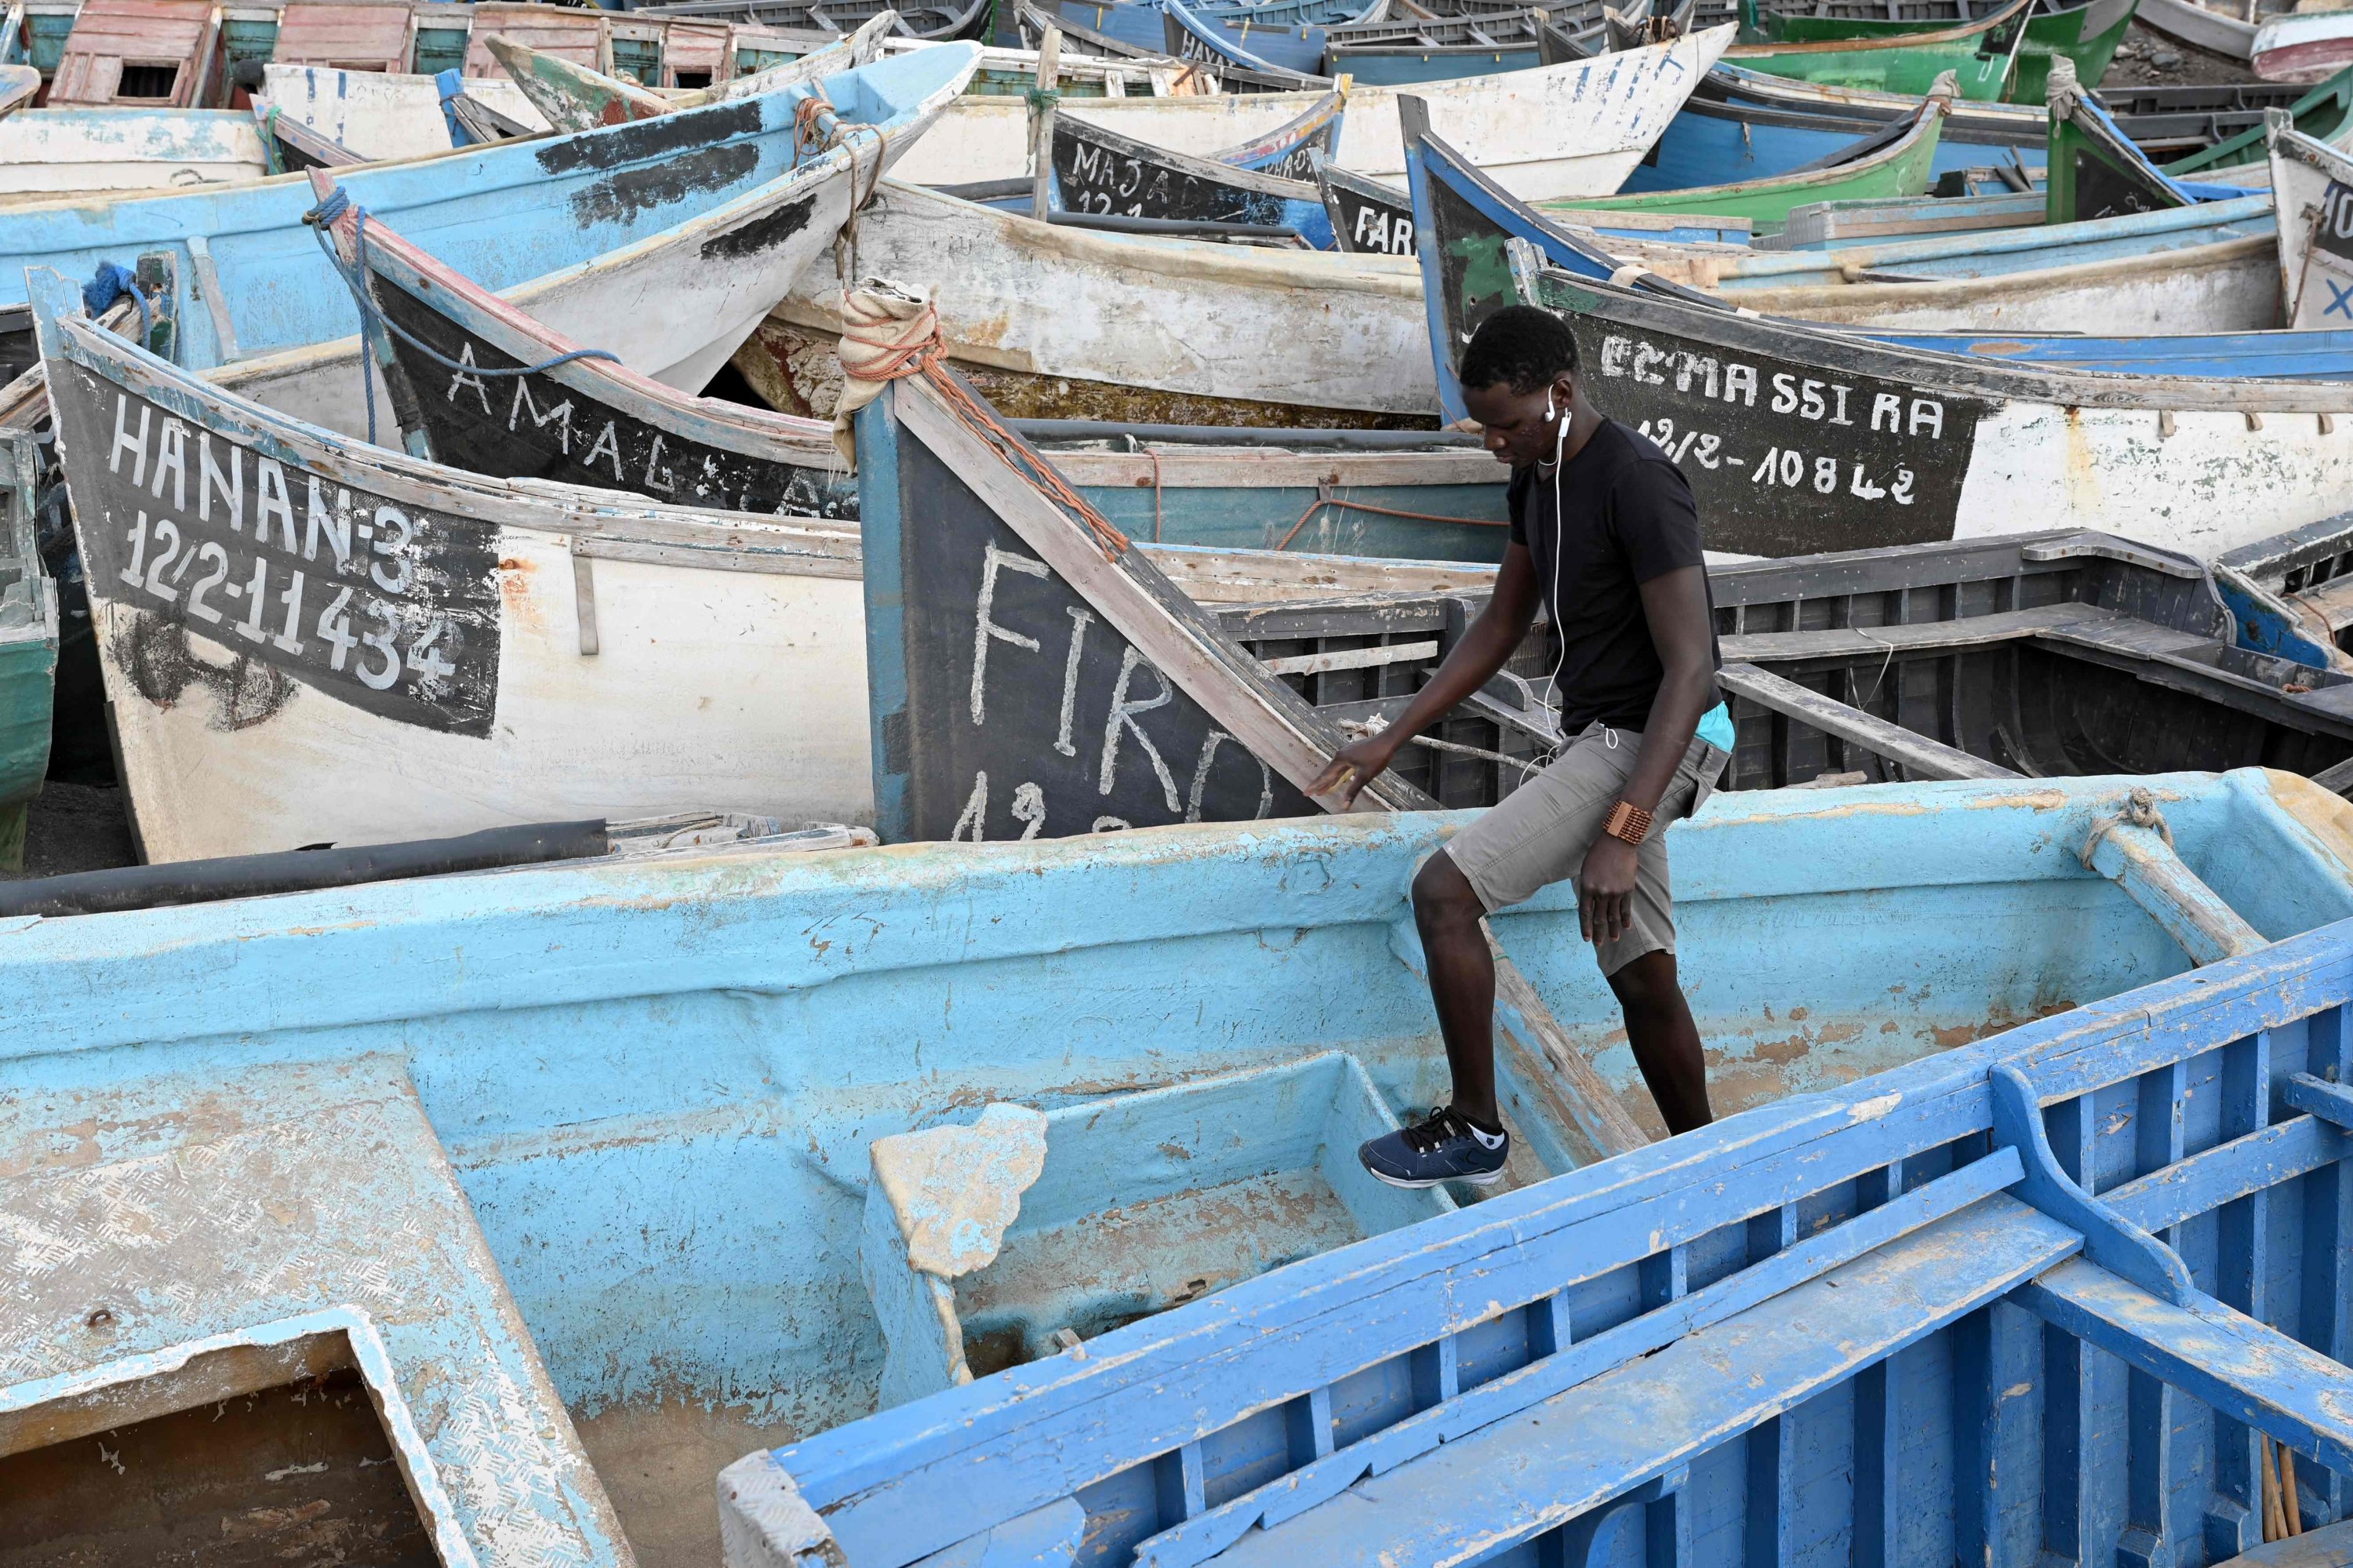 Malian migrant 'Mamadou,' 21, who arrived in a boat in August 2020, is pictured in a 'boat cemetery' in Arinaga on the island of Gran Canaria, Spain, Nov. 18, 2021. (AFP Photo)